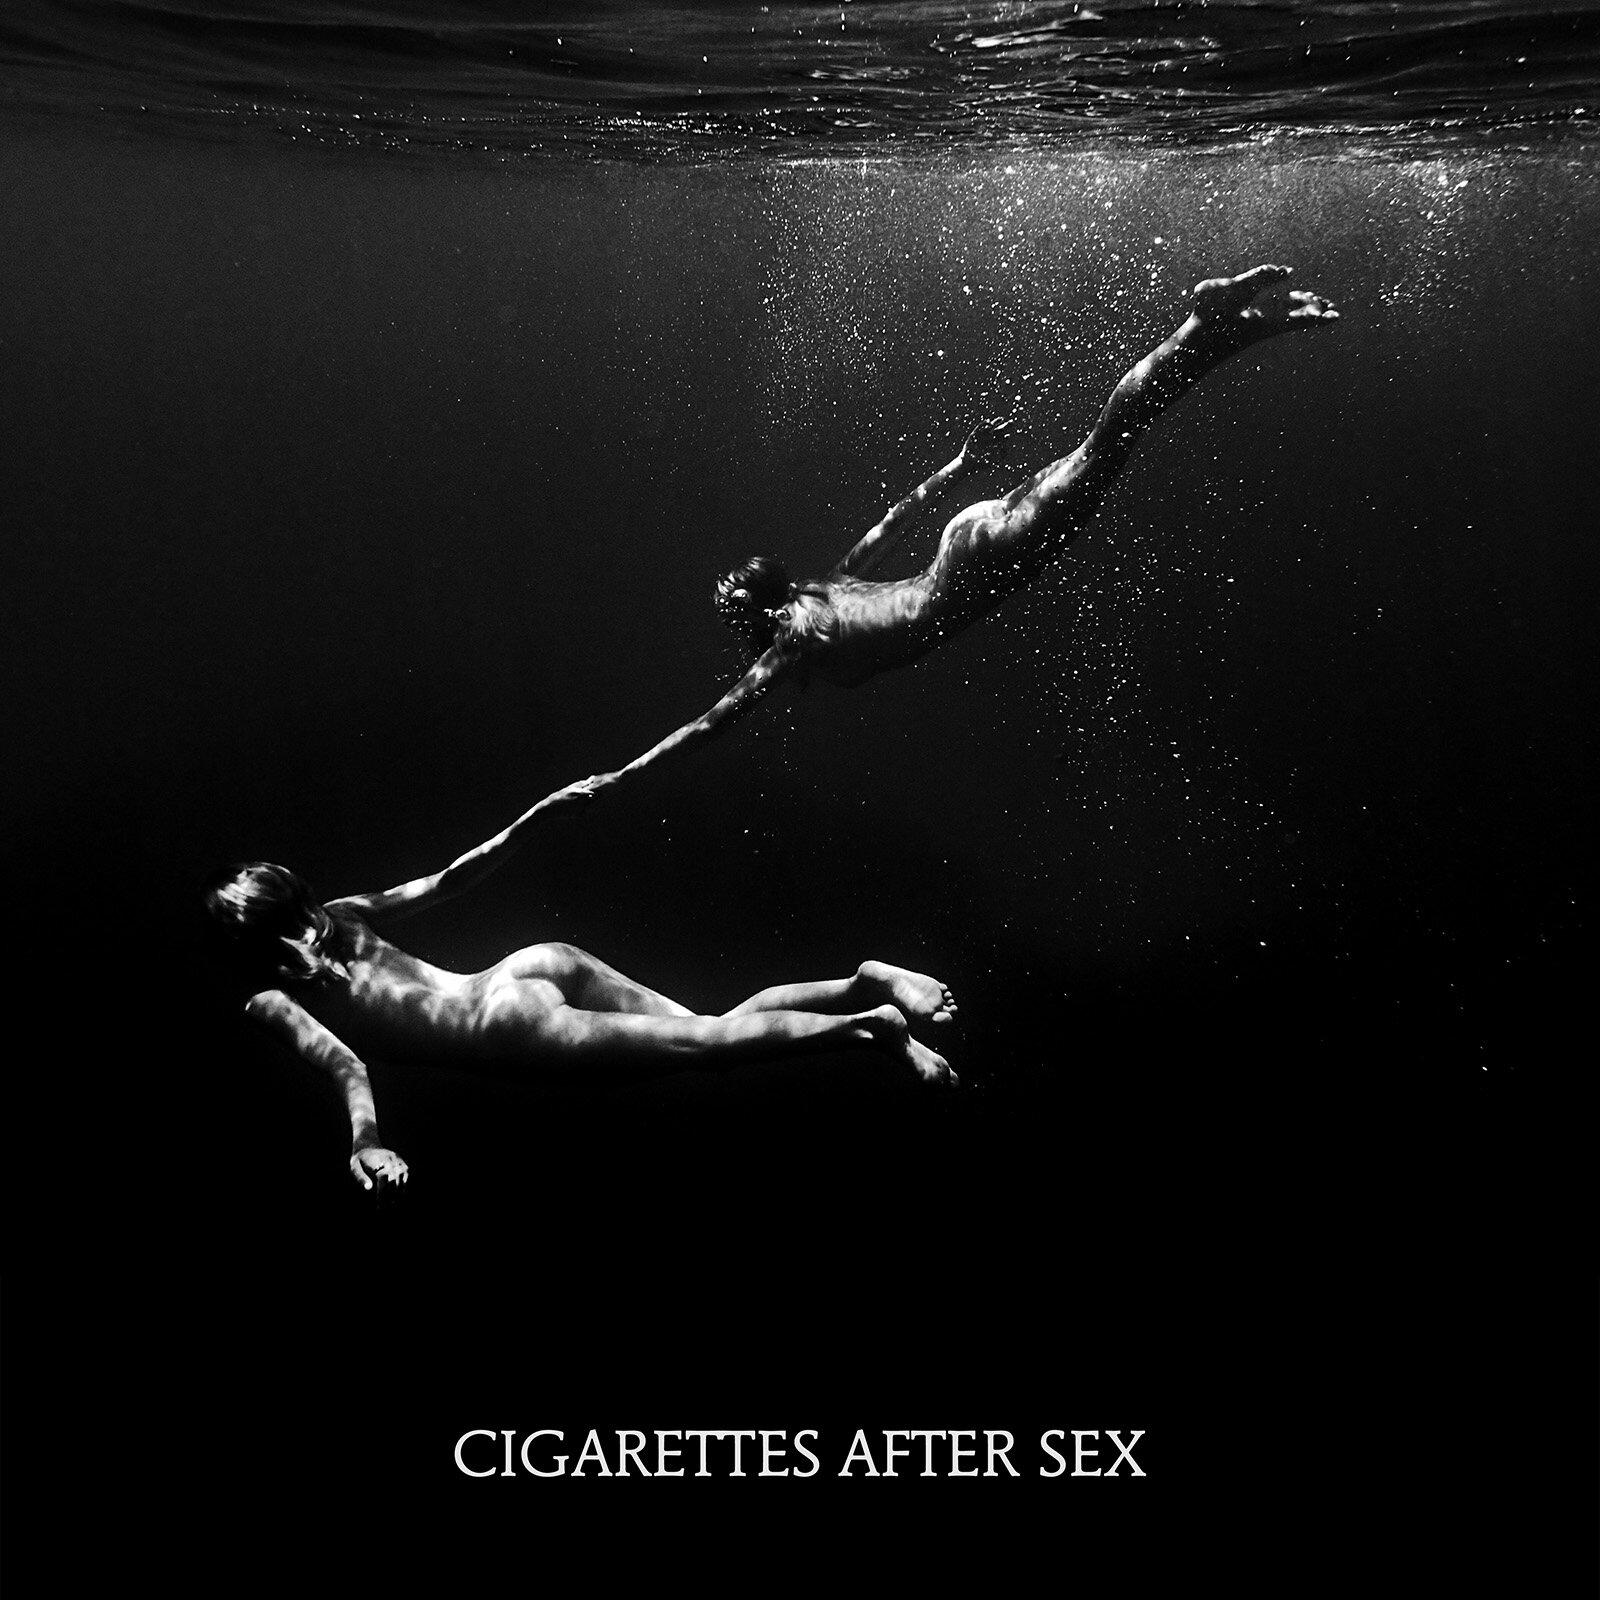 Cigarettes after sex - heavenly #cigarettes #foryou #lytics